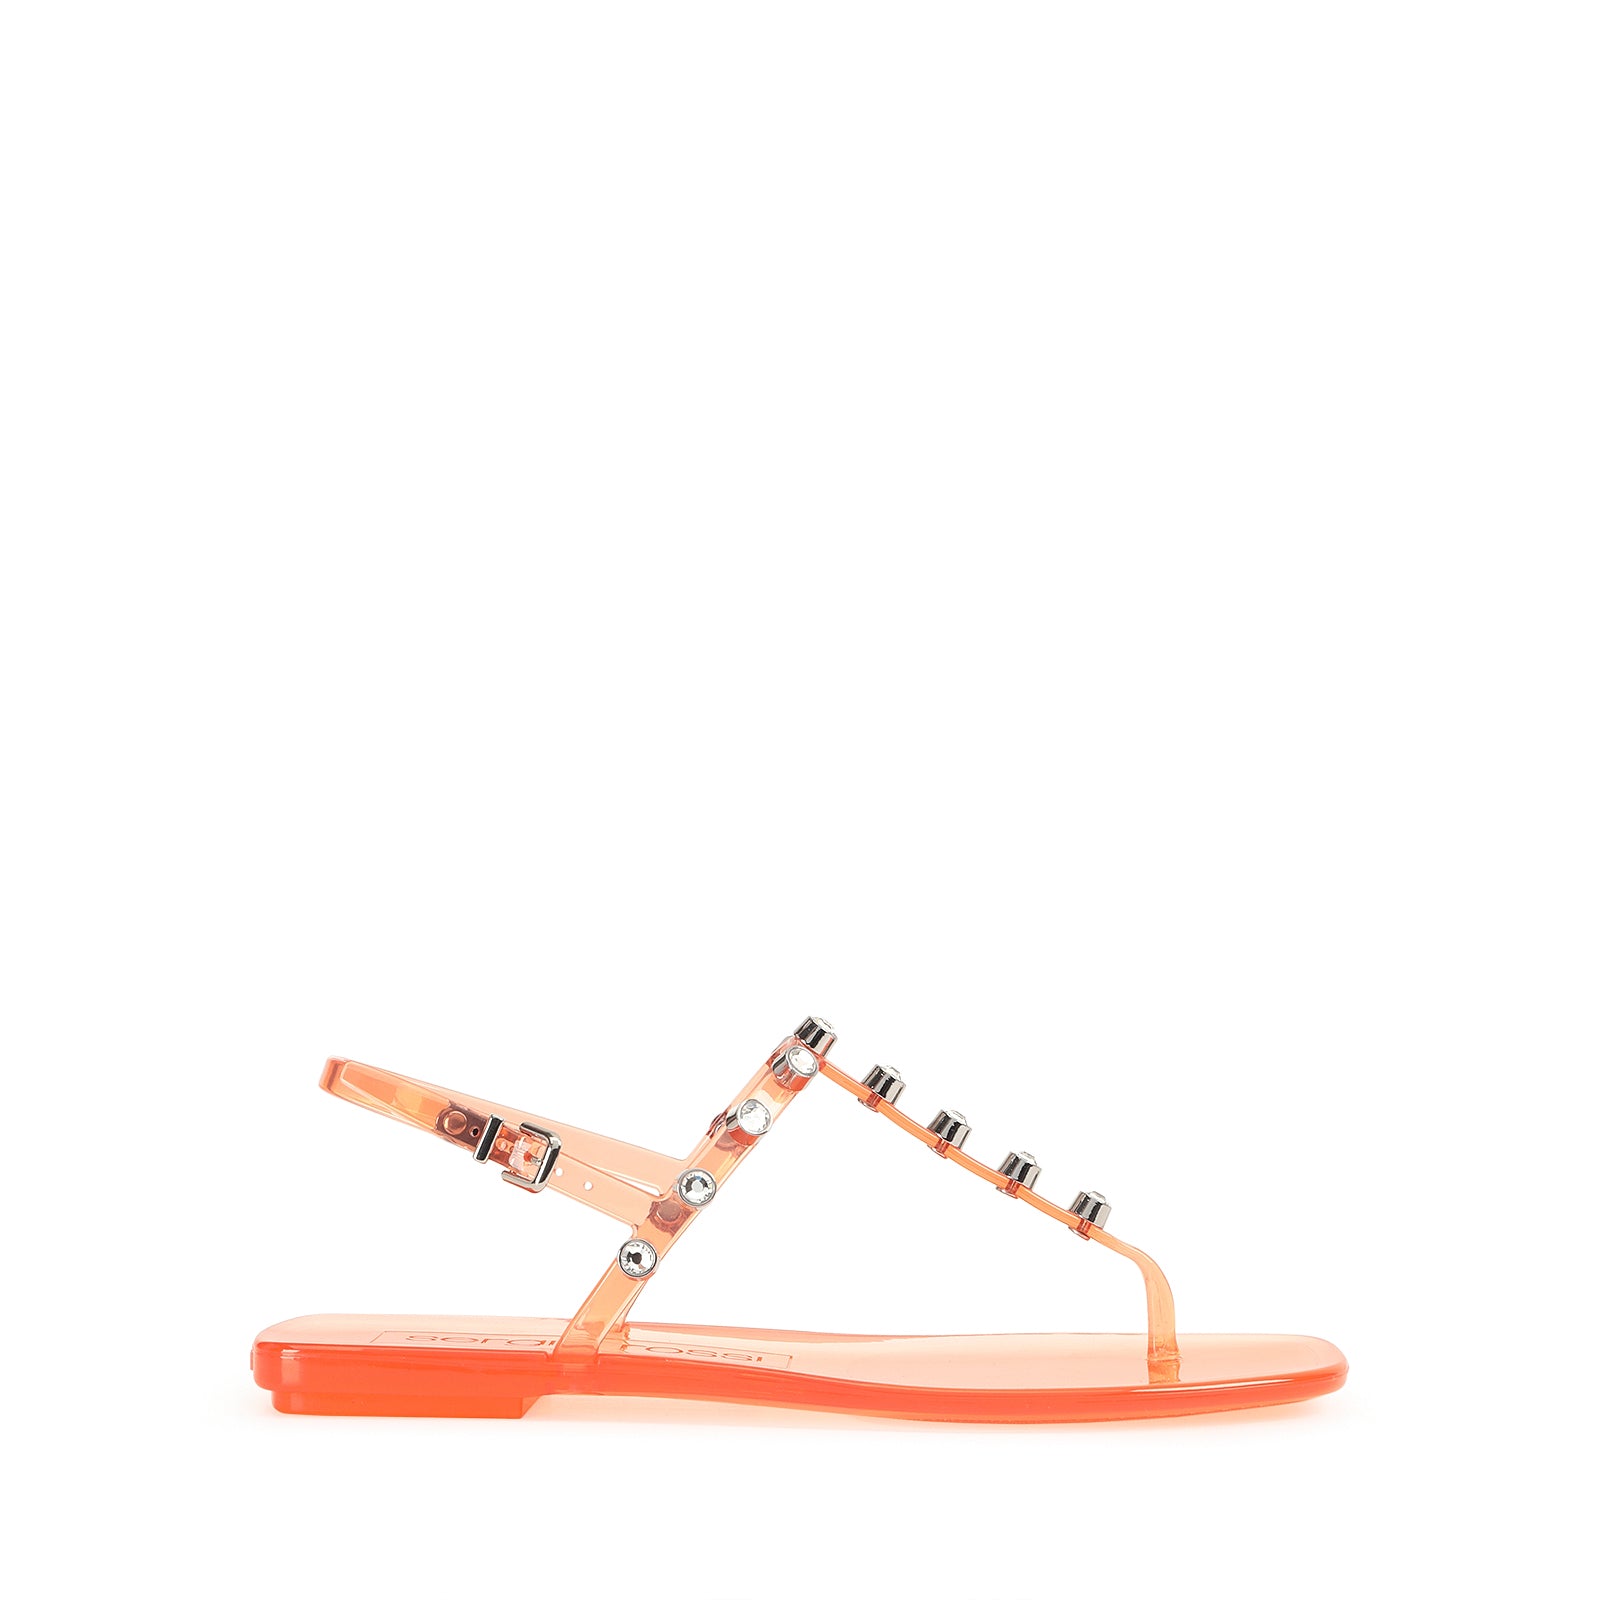 Tuesday Trend Day: Flat Sandals – Lifestyle of a Fashionista